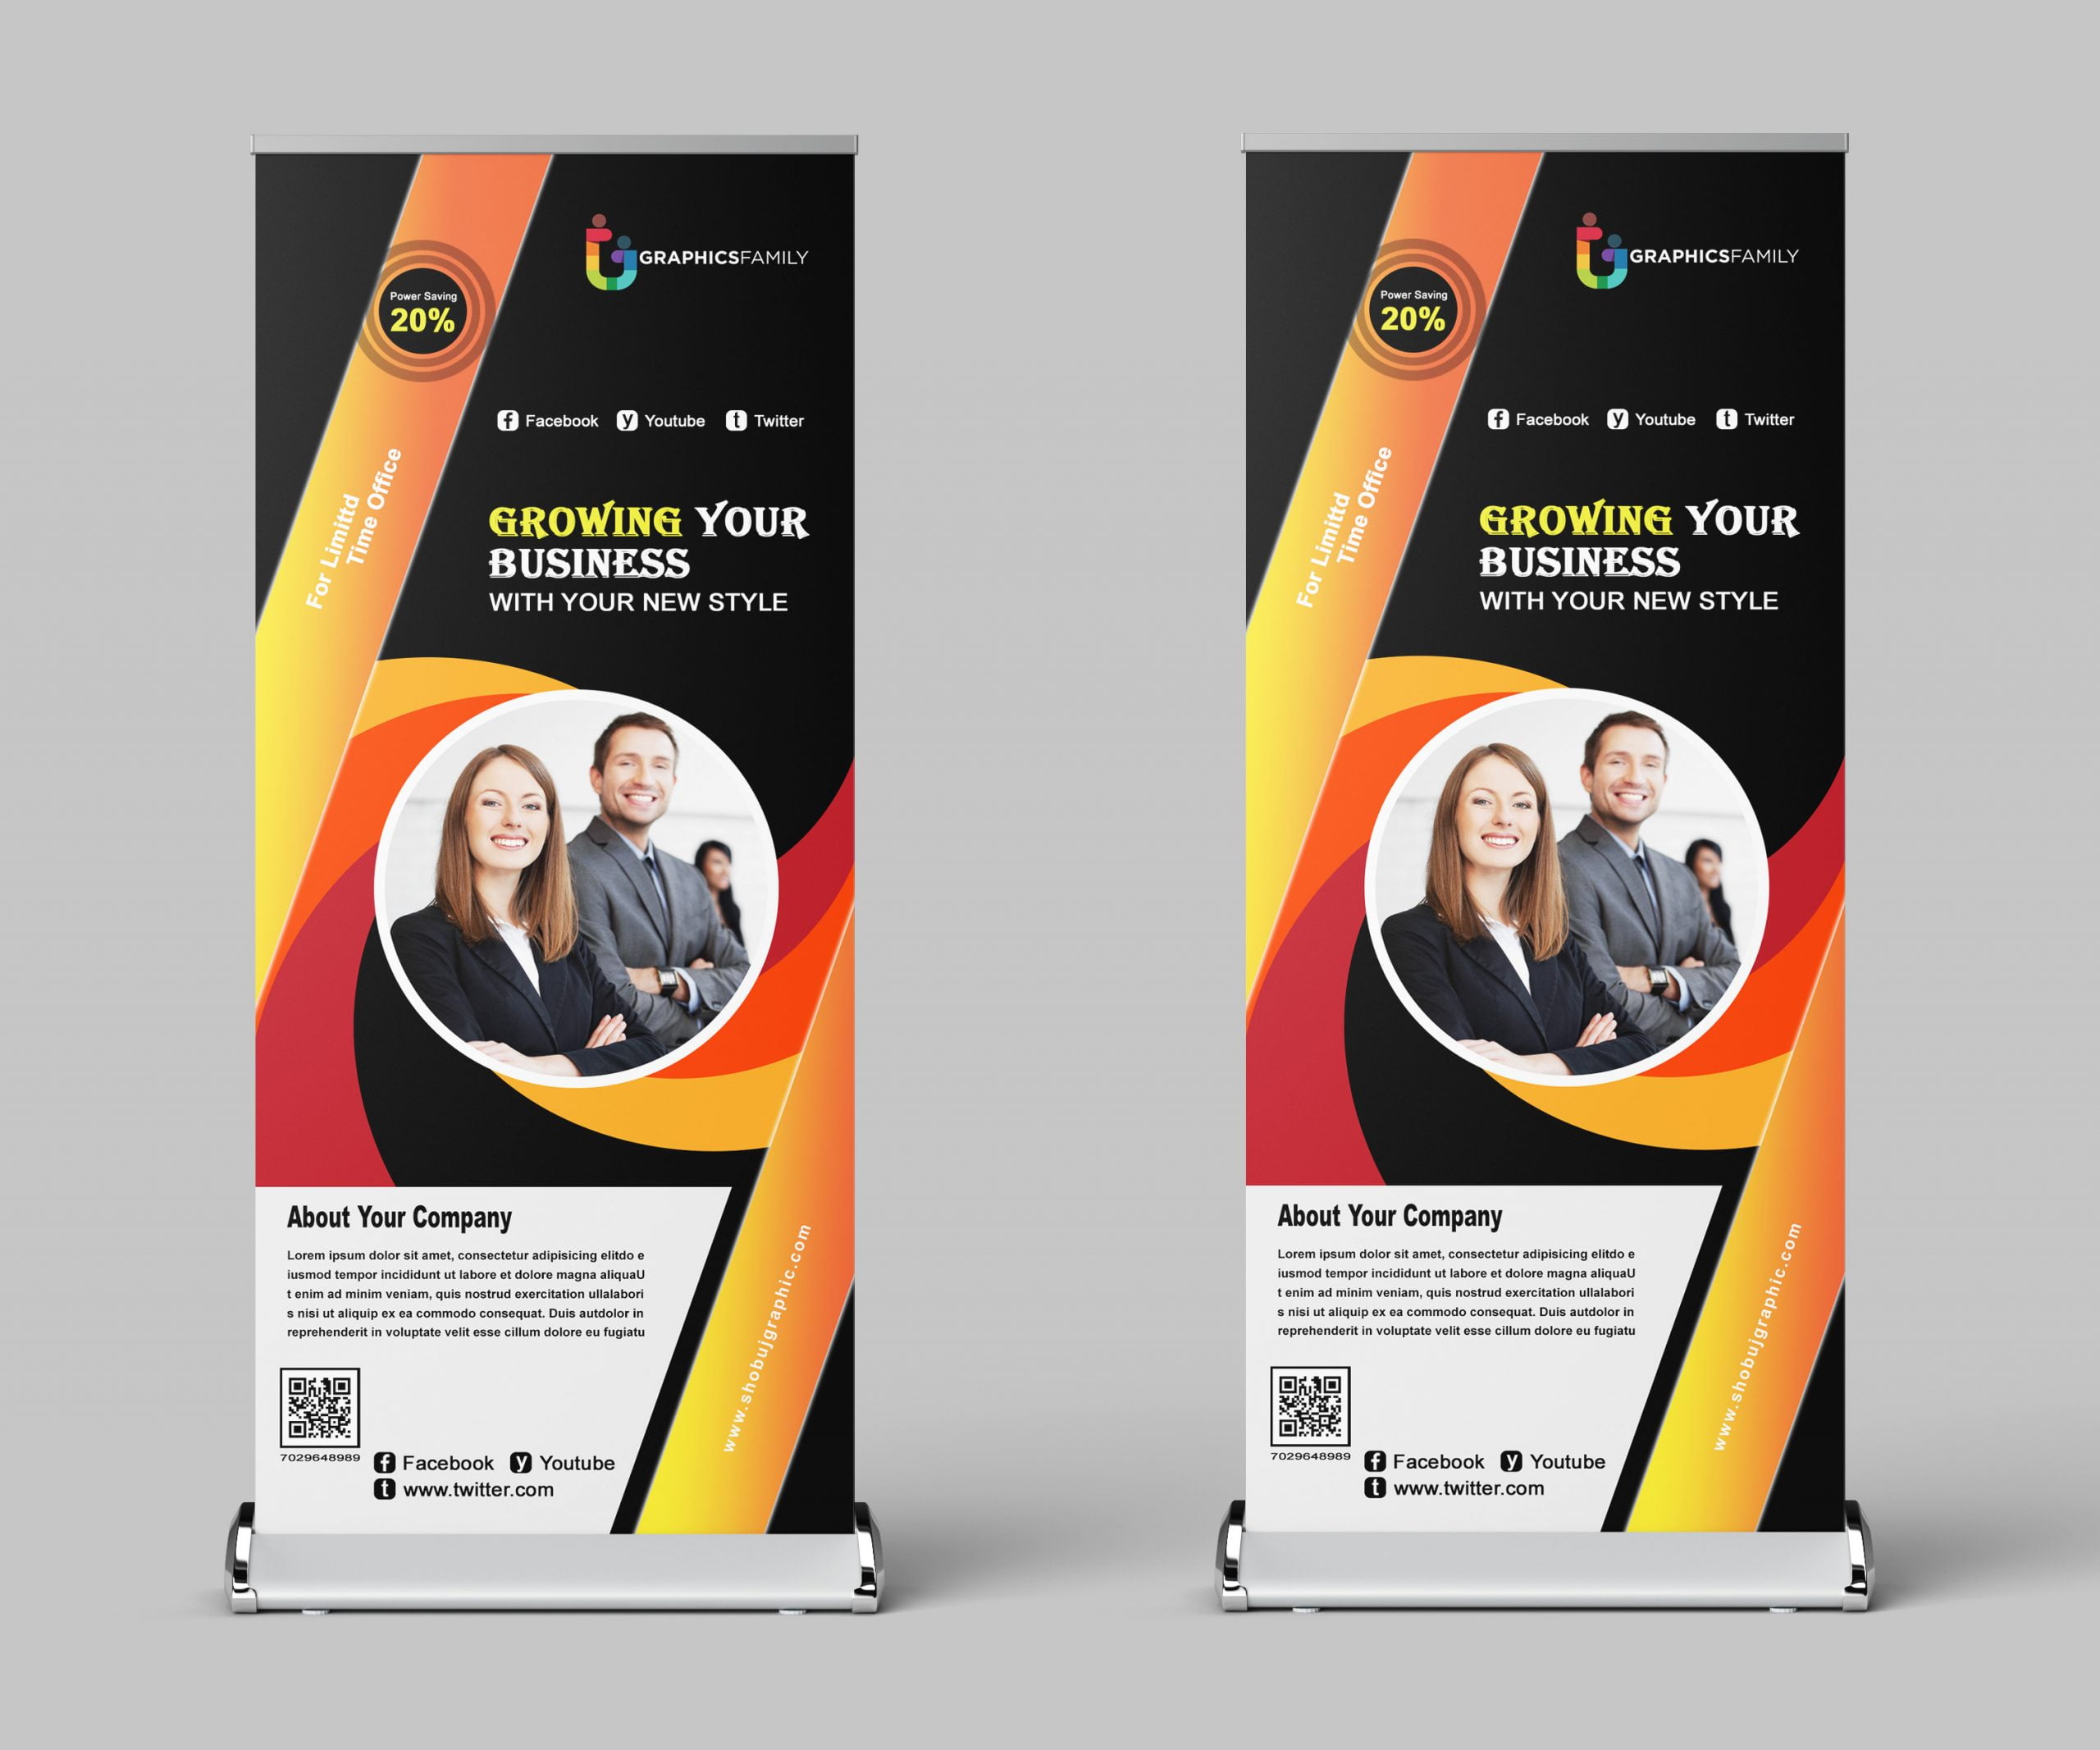 Free .PSD Roll Up Banner Design Template For Your Business GraphicsFamily